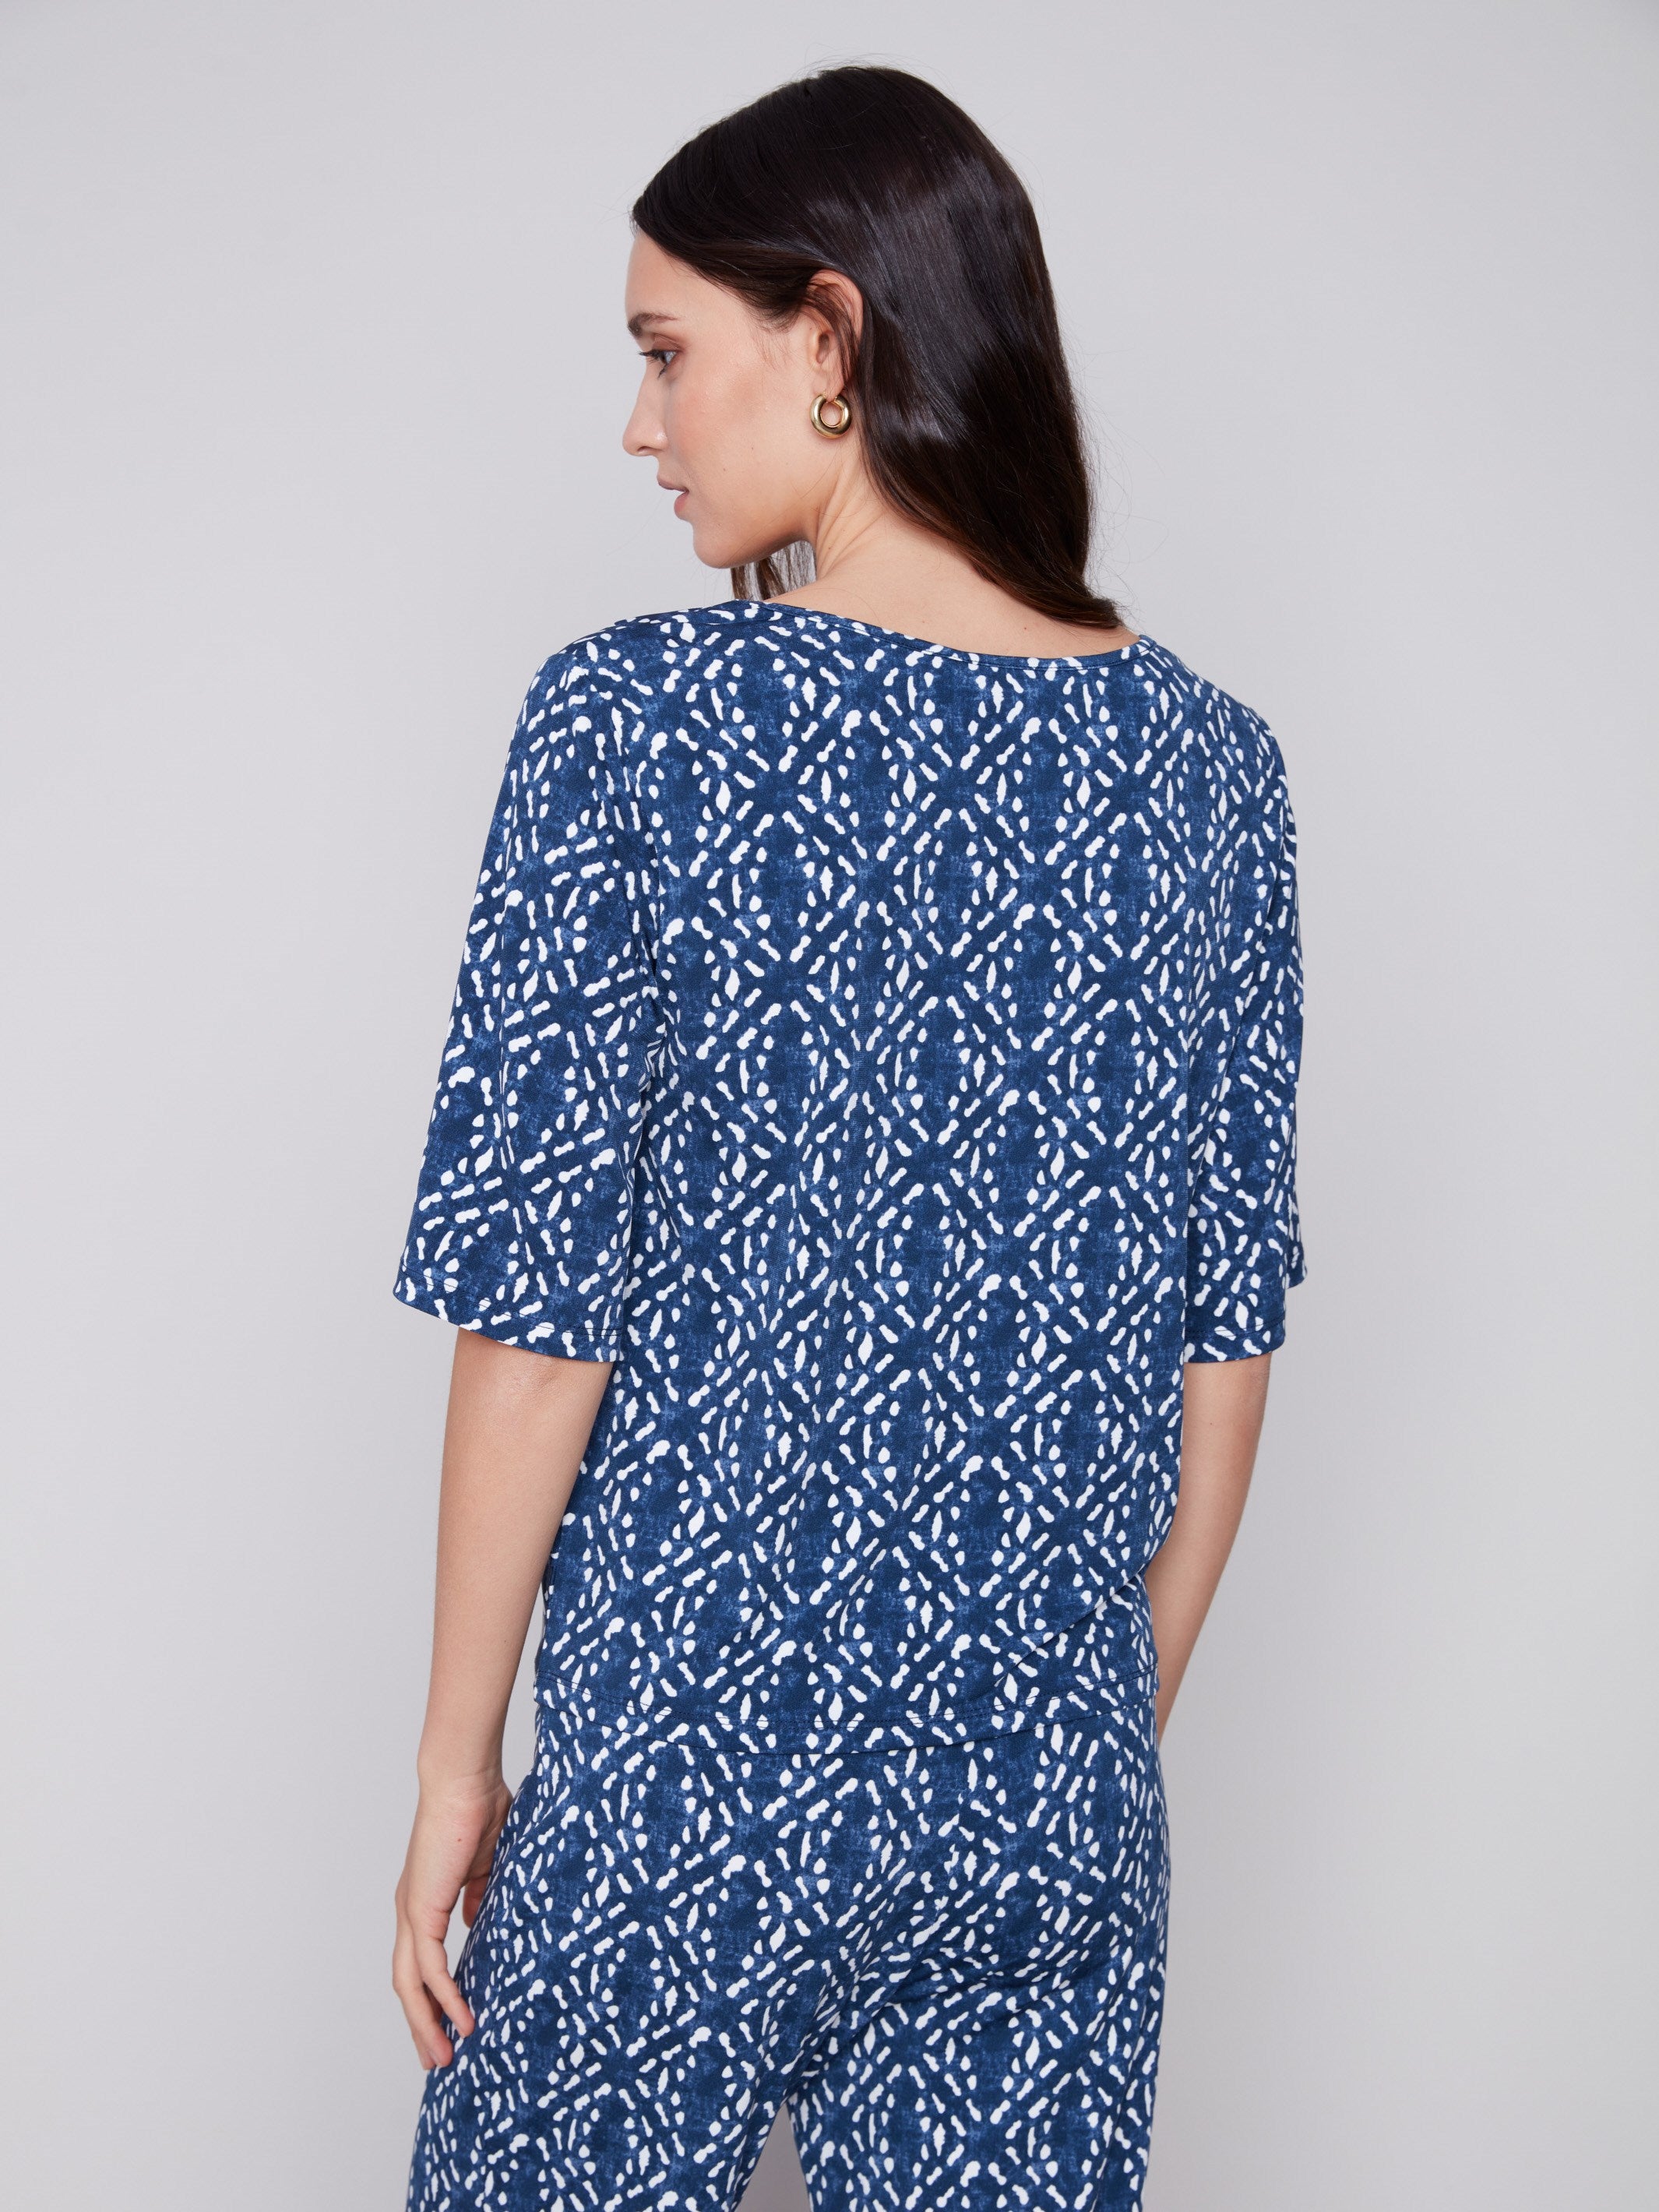 Charlie B Short-Sleeved Printed Top with Front Knot - Indigo - Image 8